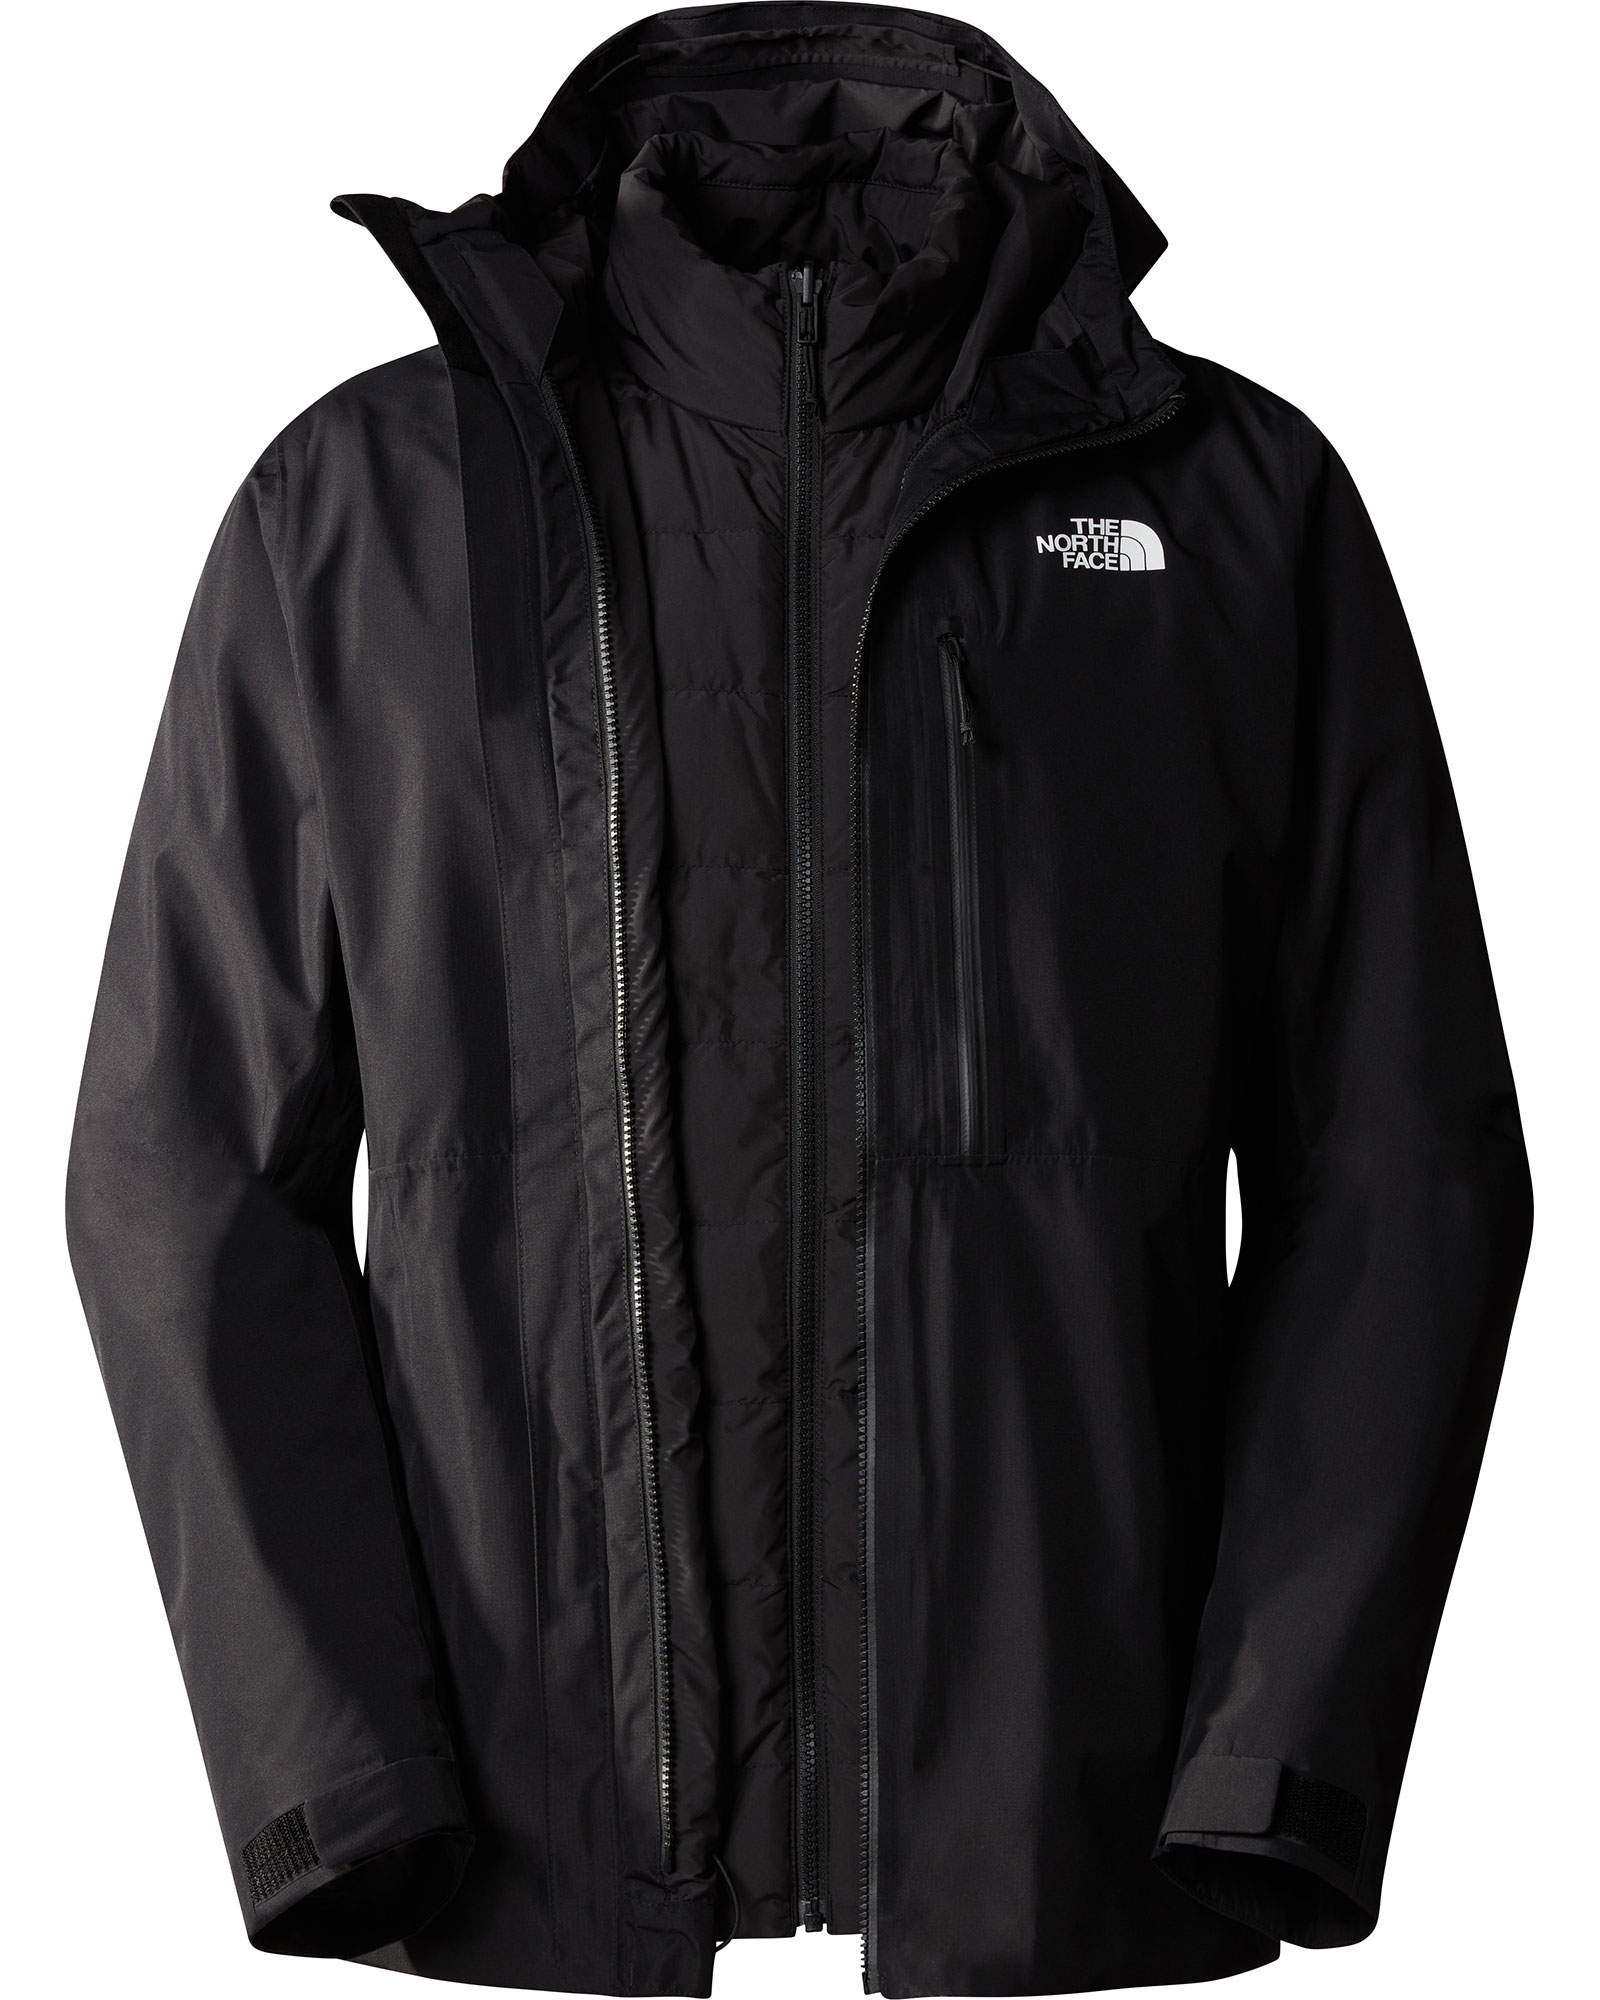 The North Face Men’s North Table Down Triclimate Jacket - TNF Black-TNF Black S